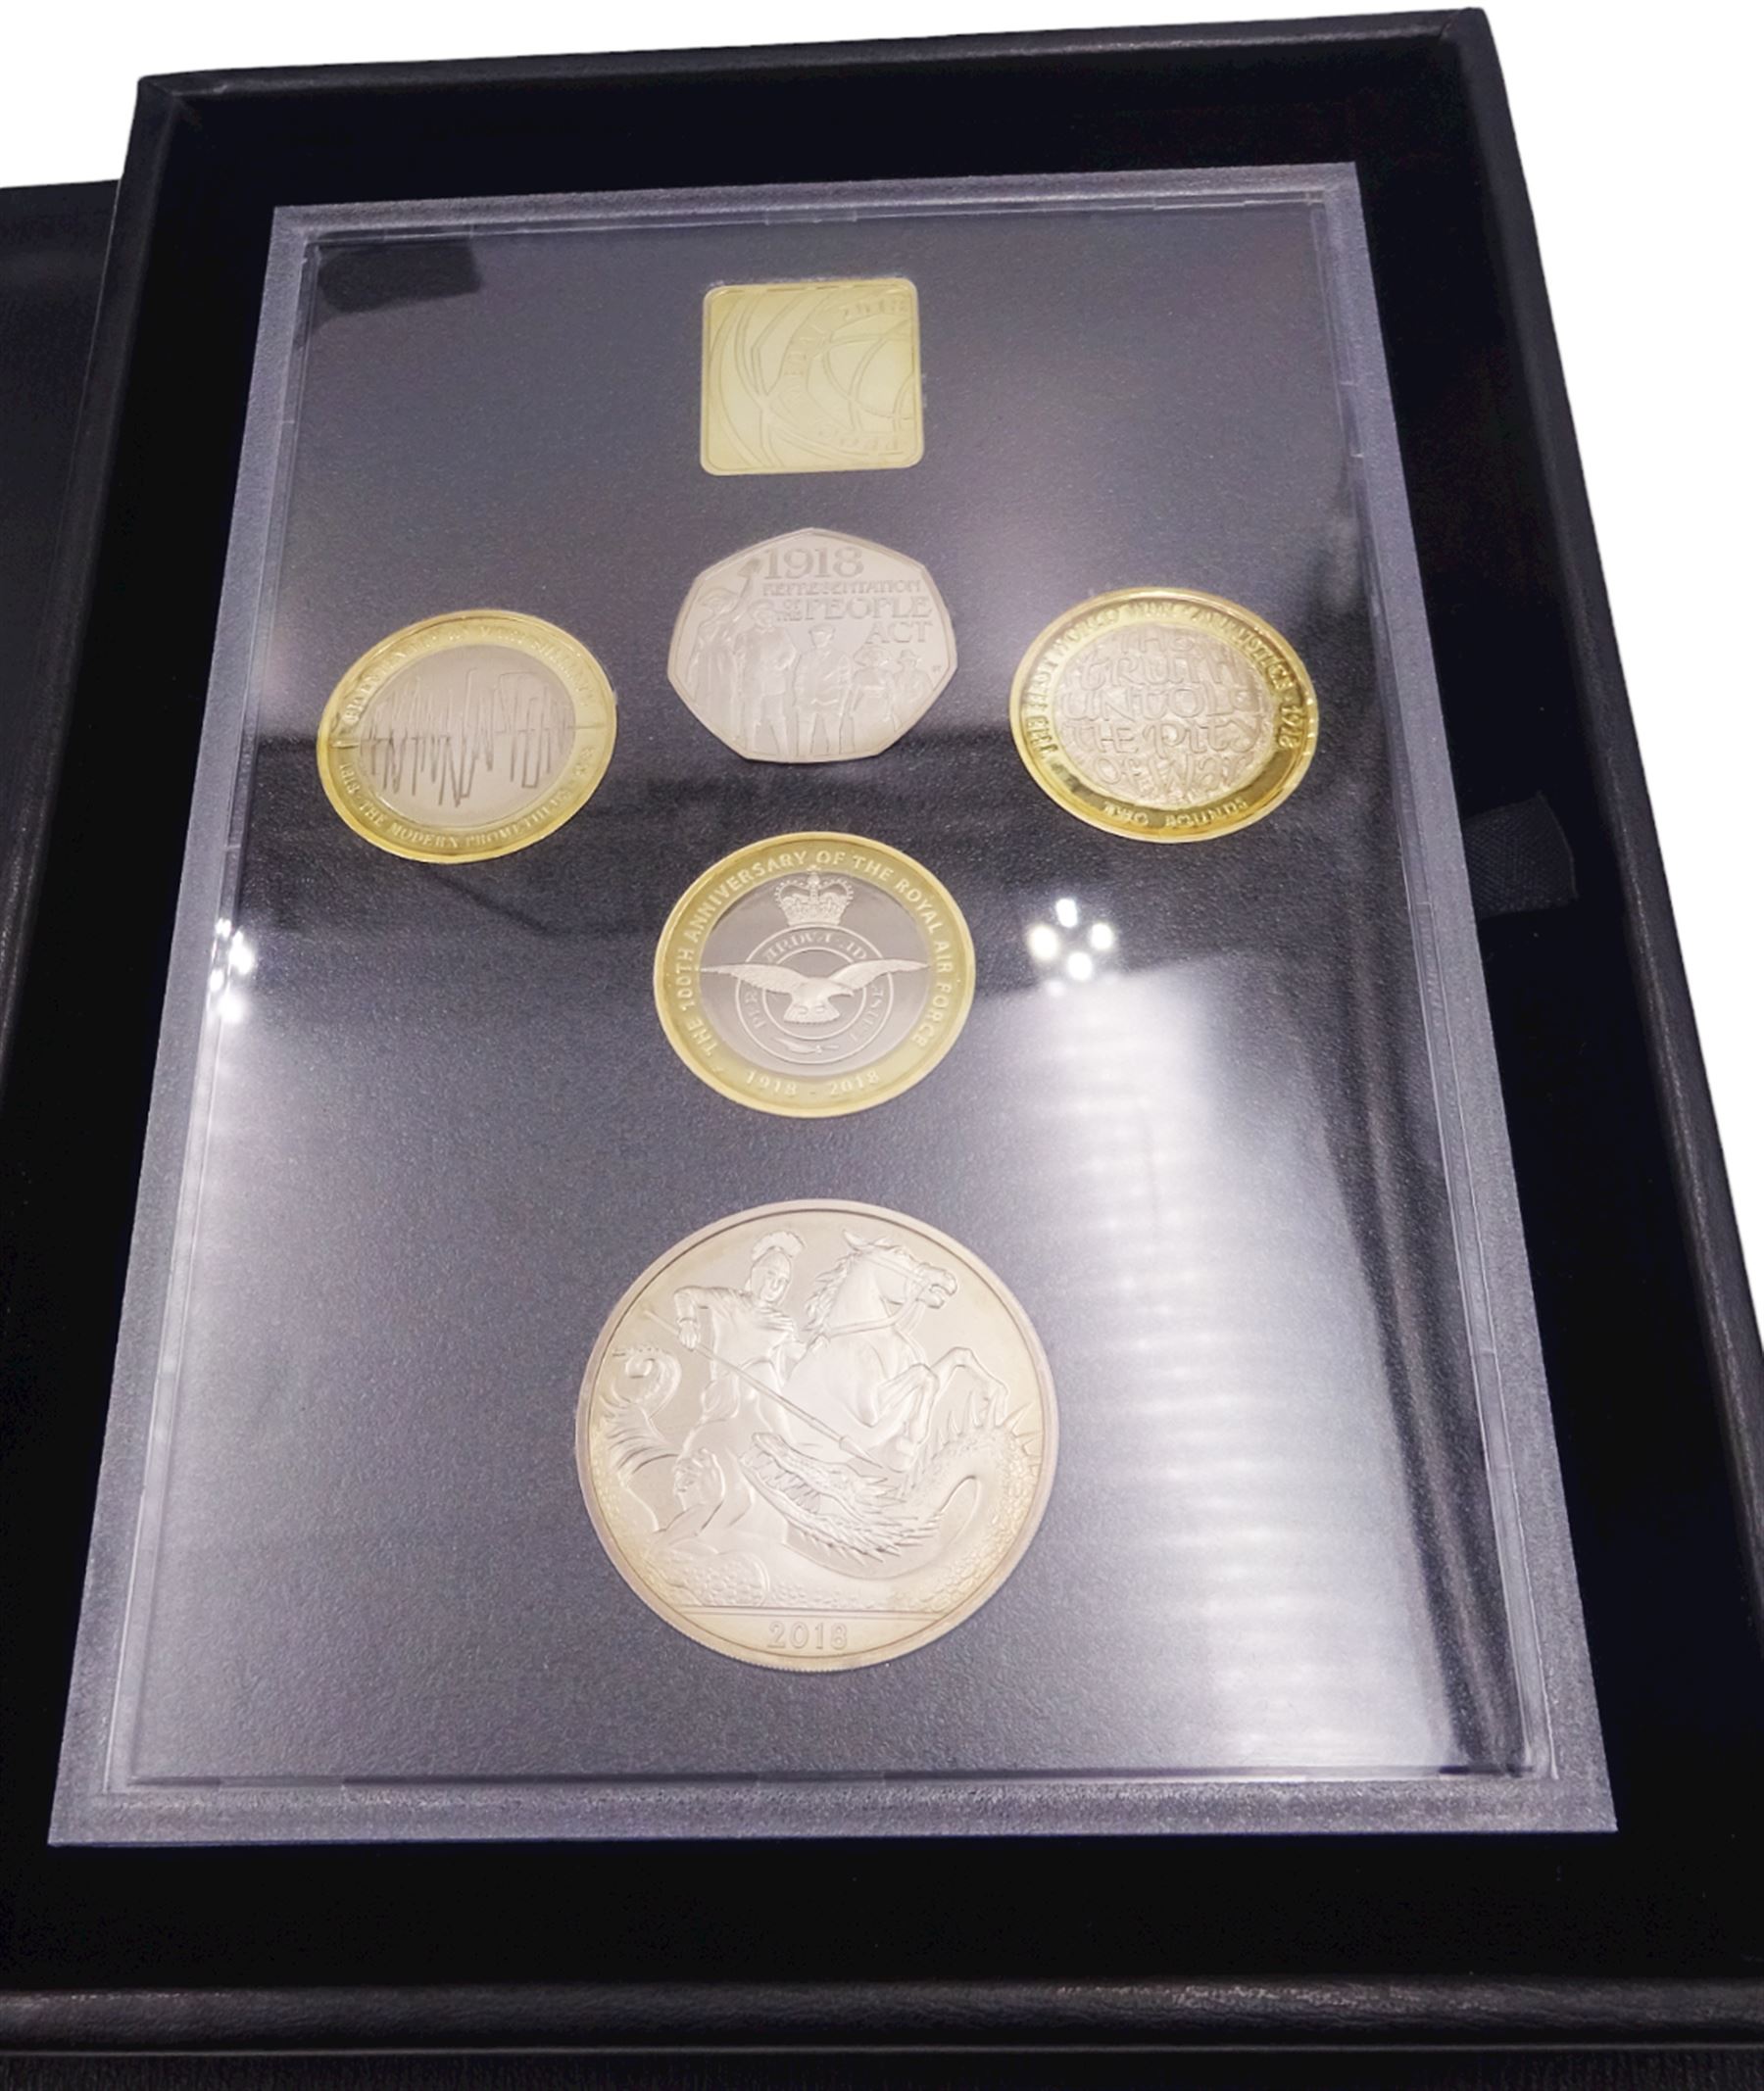 The Royal Mint United Kingdom 2018 proof coin set - Image 2 of 2